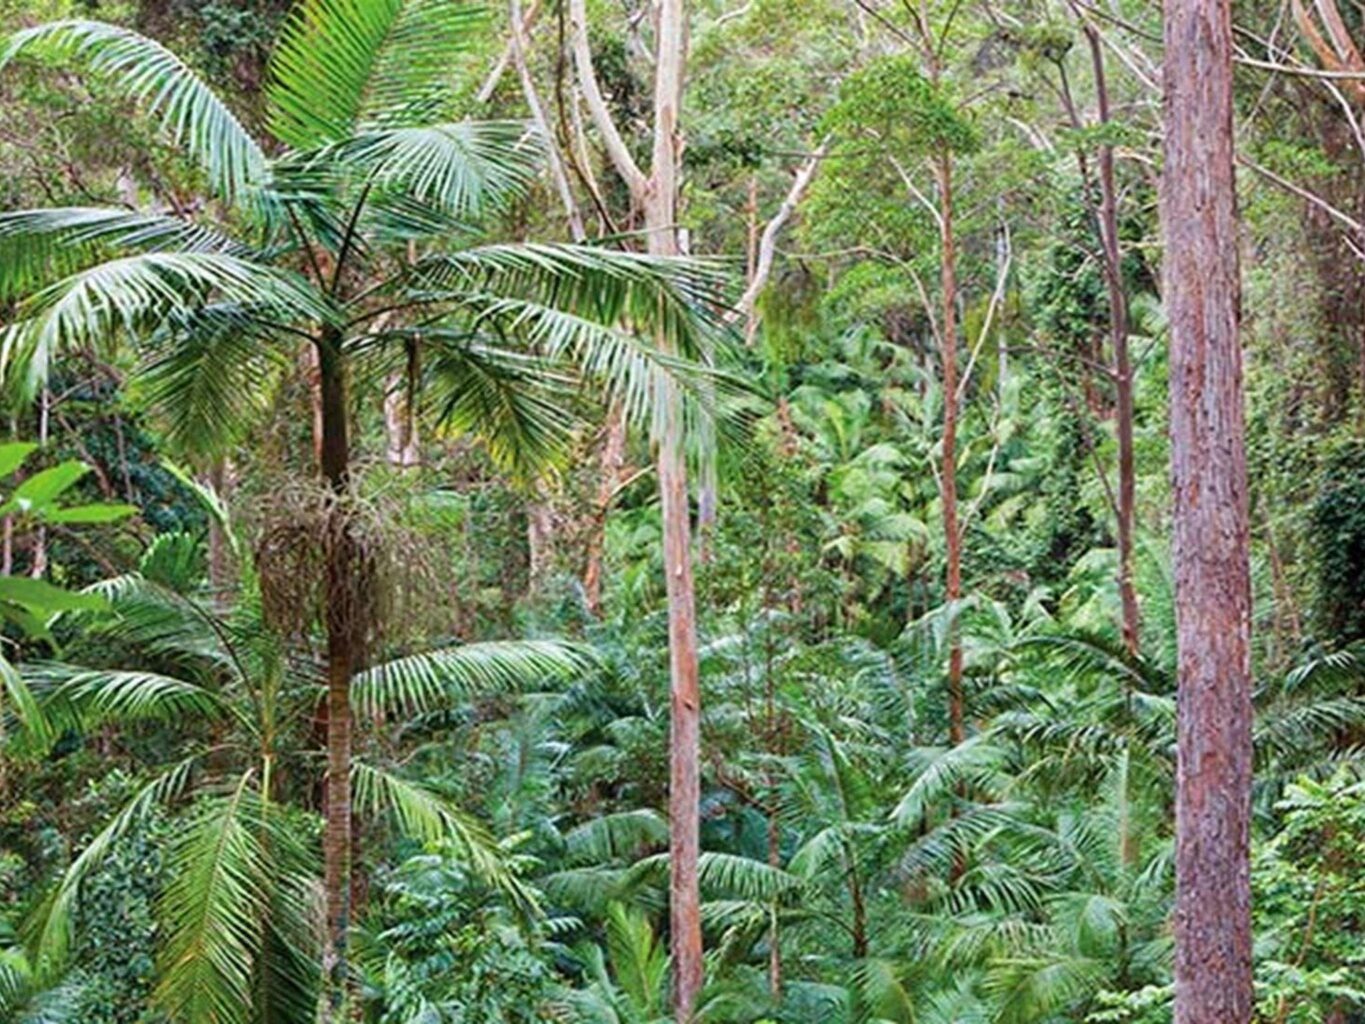 Palm-lined rainforest, Ulidarra National Park. Photo: Robert Cleary © DPIE